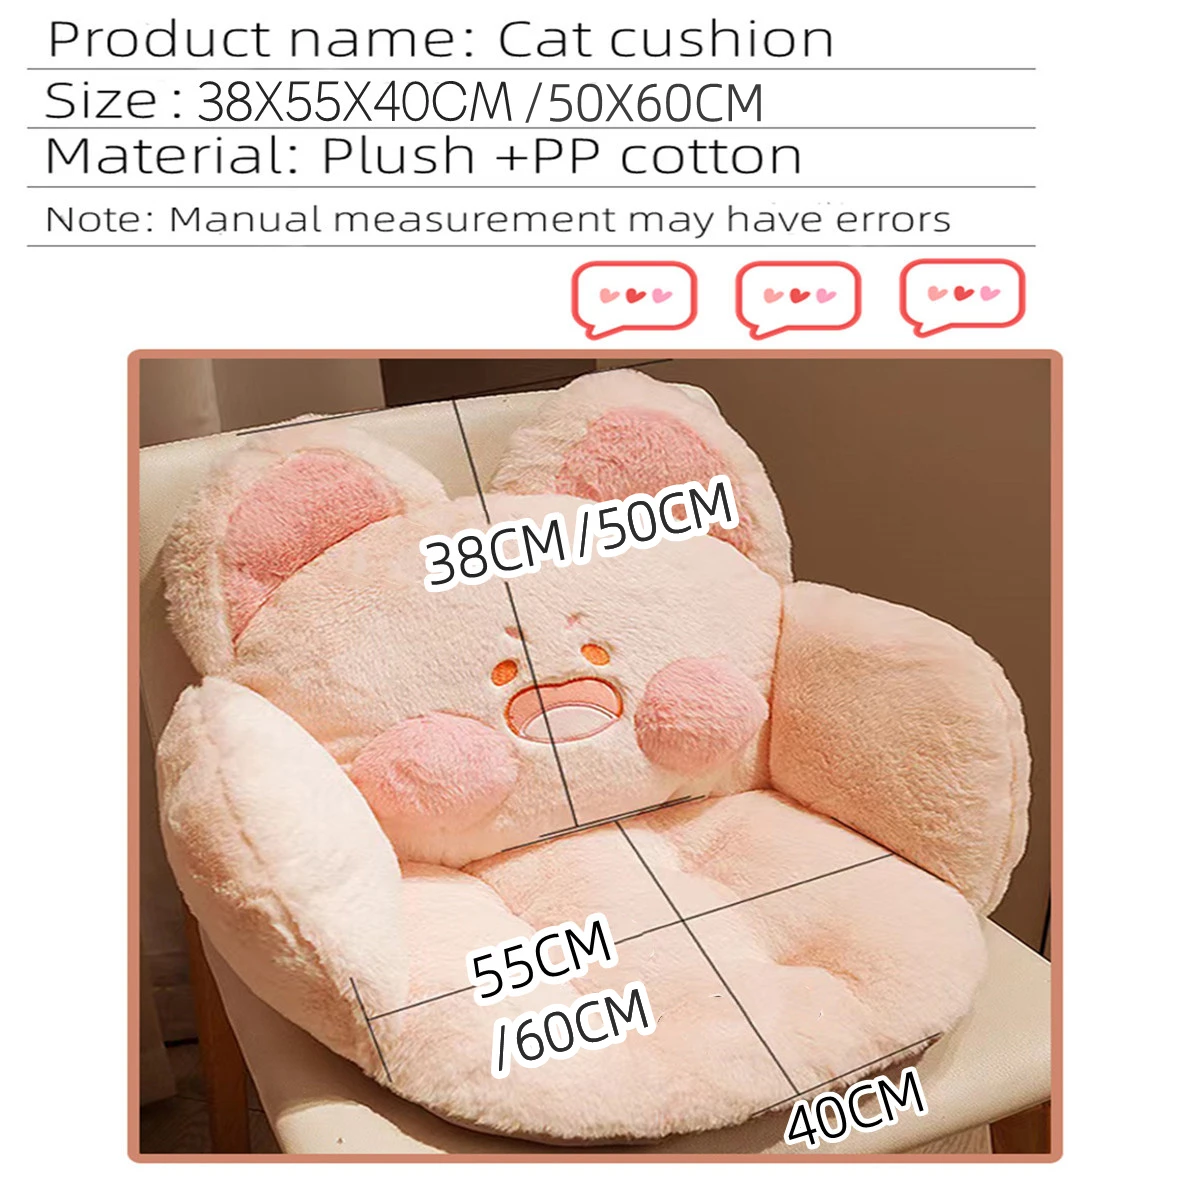 https://ae01.alicdn.com/kf/S90e0ad81a40b43a19baefa9ded2a4ebaq/Cute-Seat-Cushion-With-Backrest-Kawaii-Home-Decor-For-Office-Bedroom-DUDUCat-Lazy-Sofa-Comfortable-and.jpg